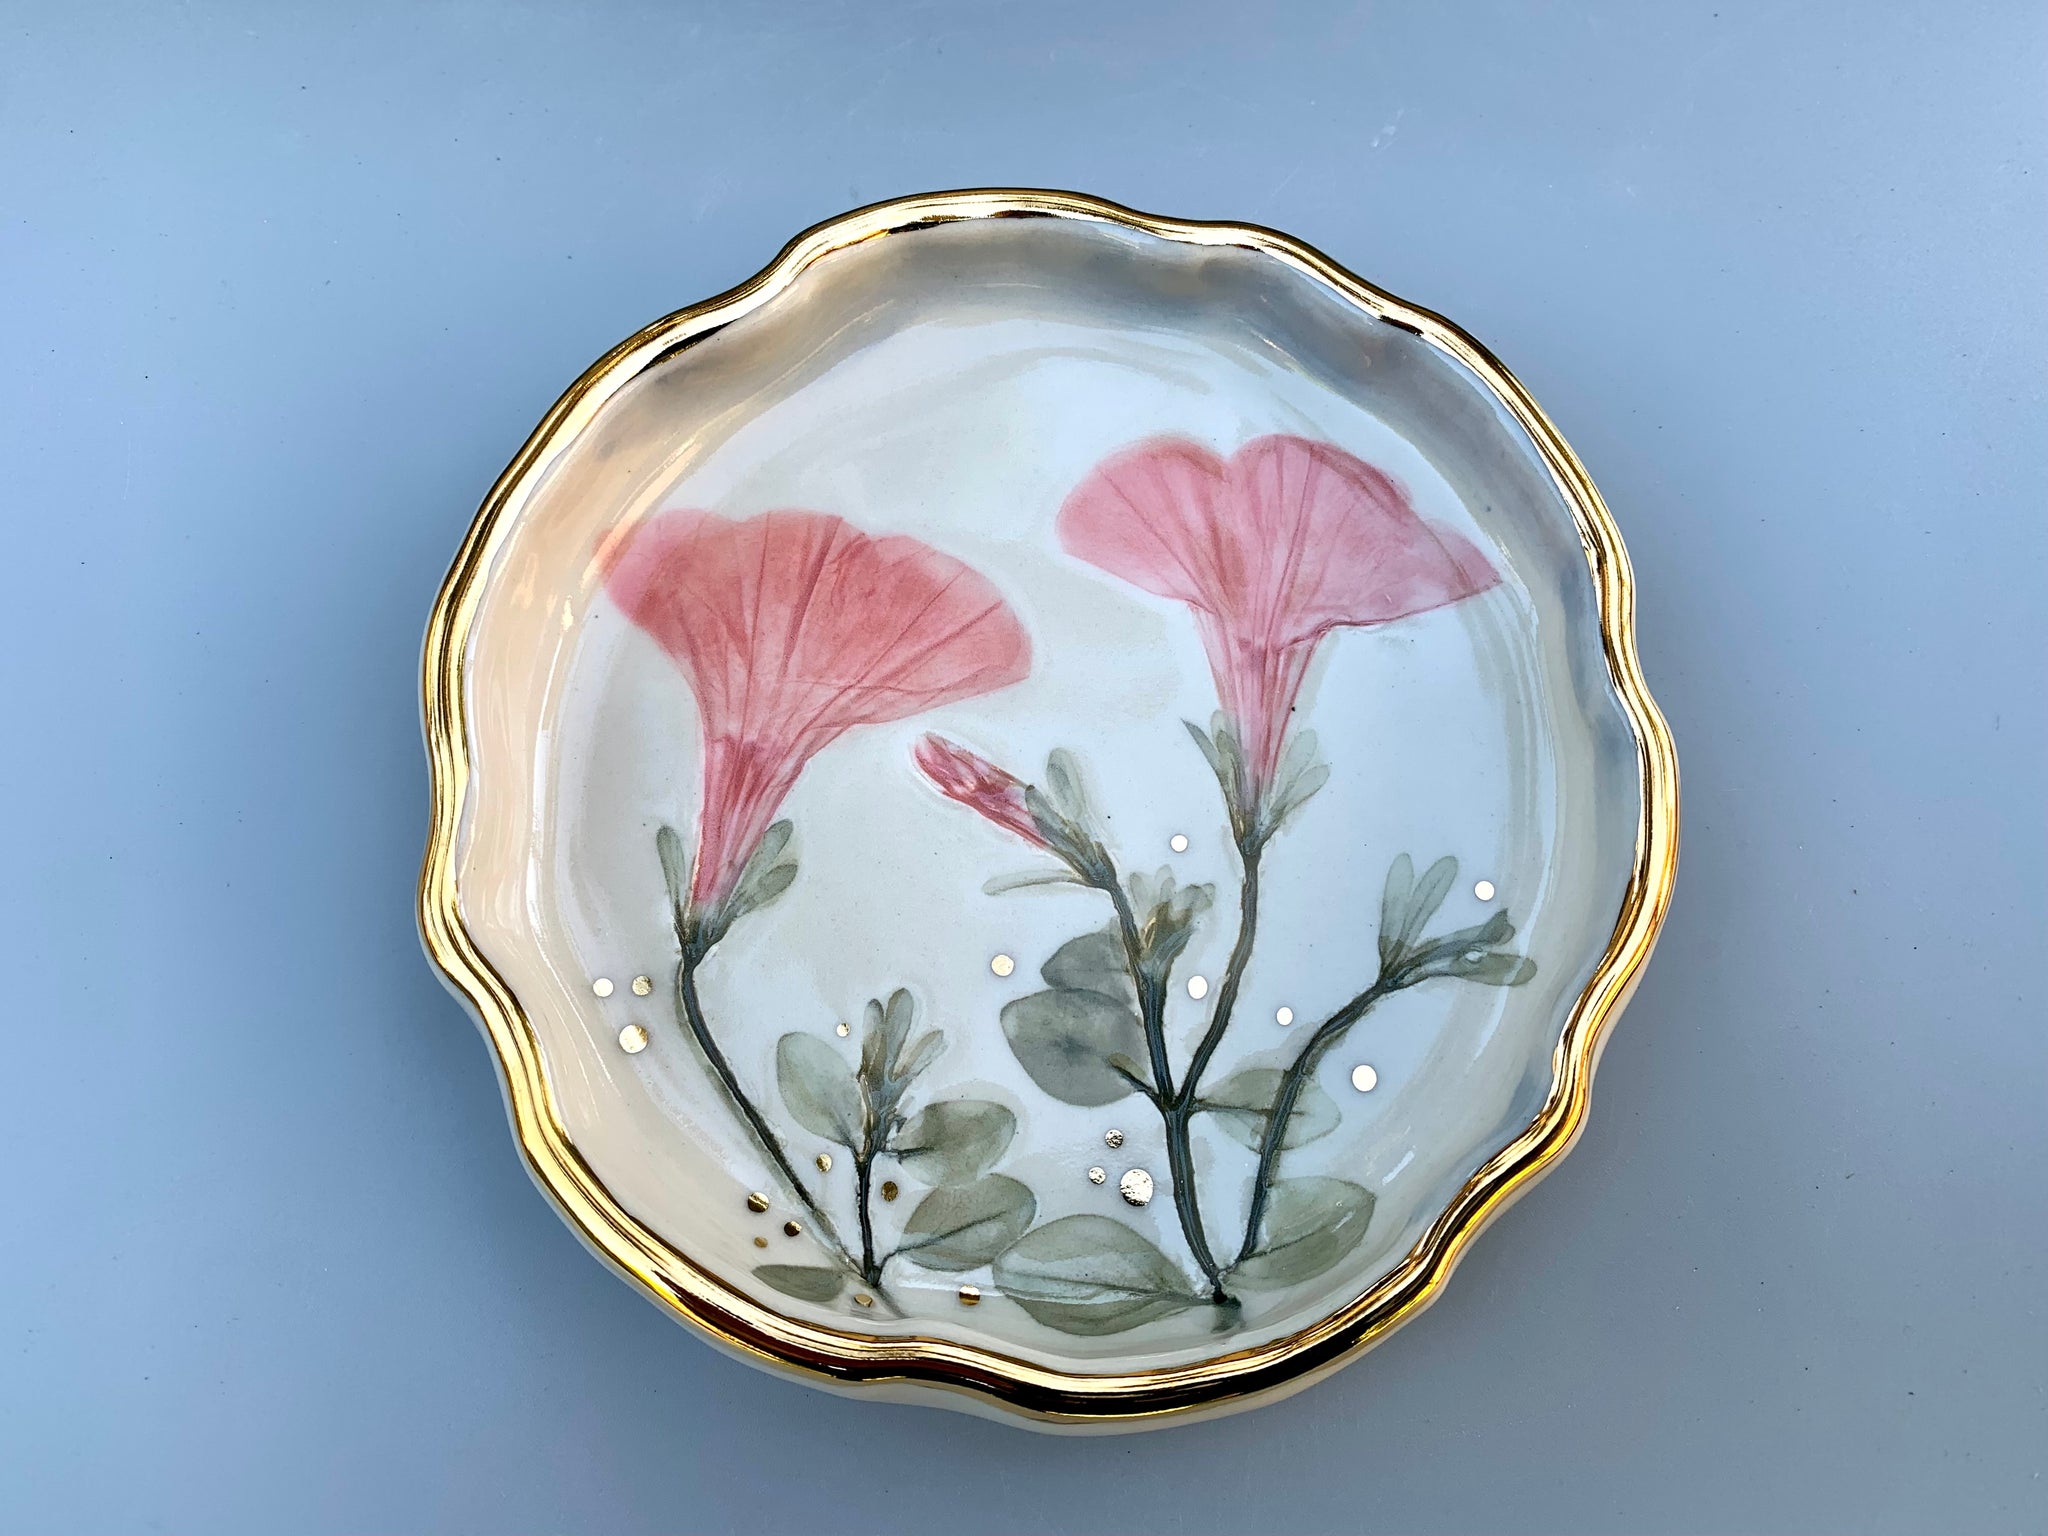 Pink Petunia Flower Jewelry Dish, Ceramic with Gold Accent